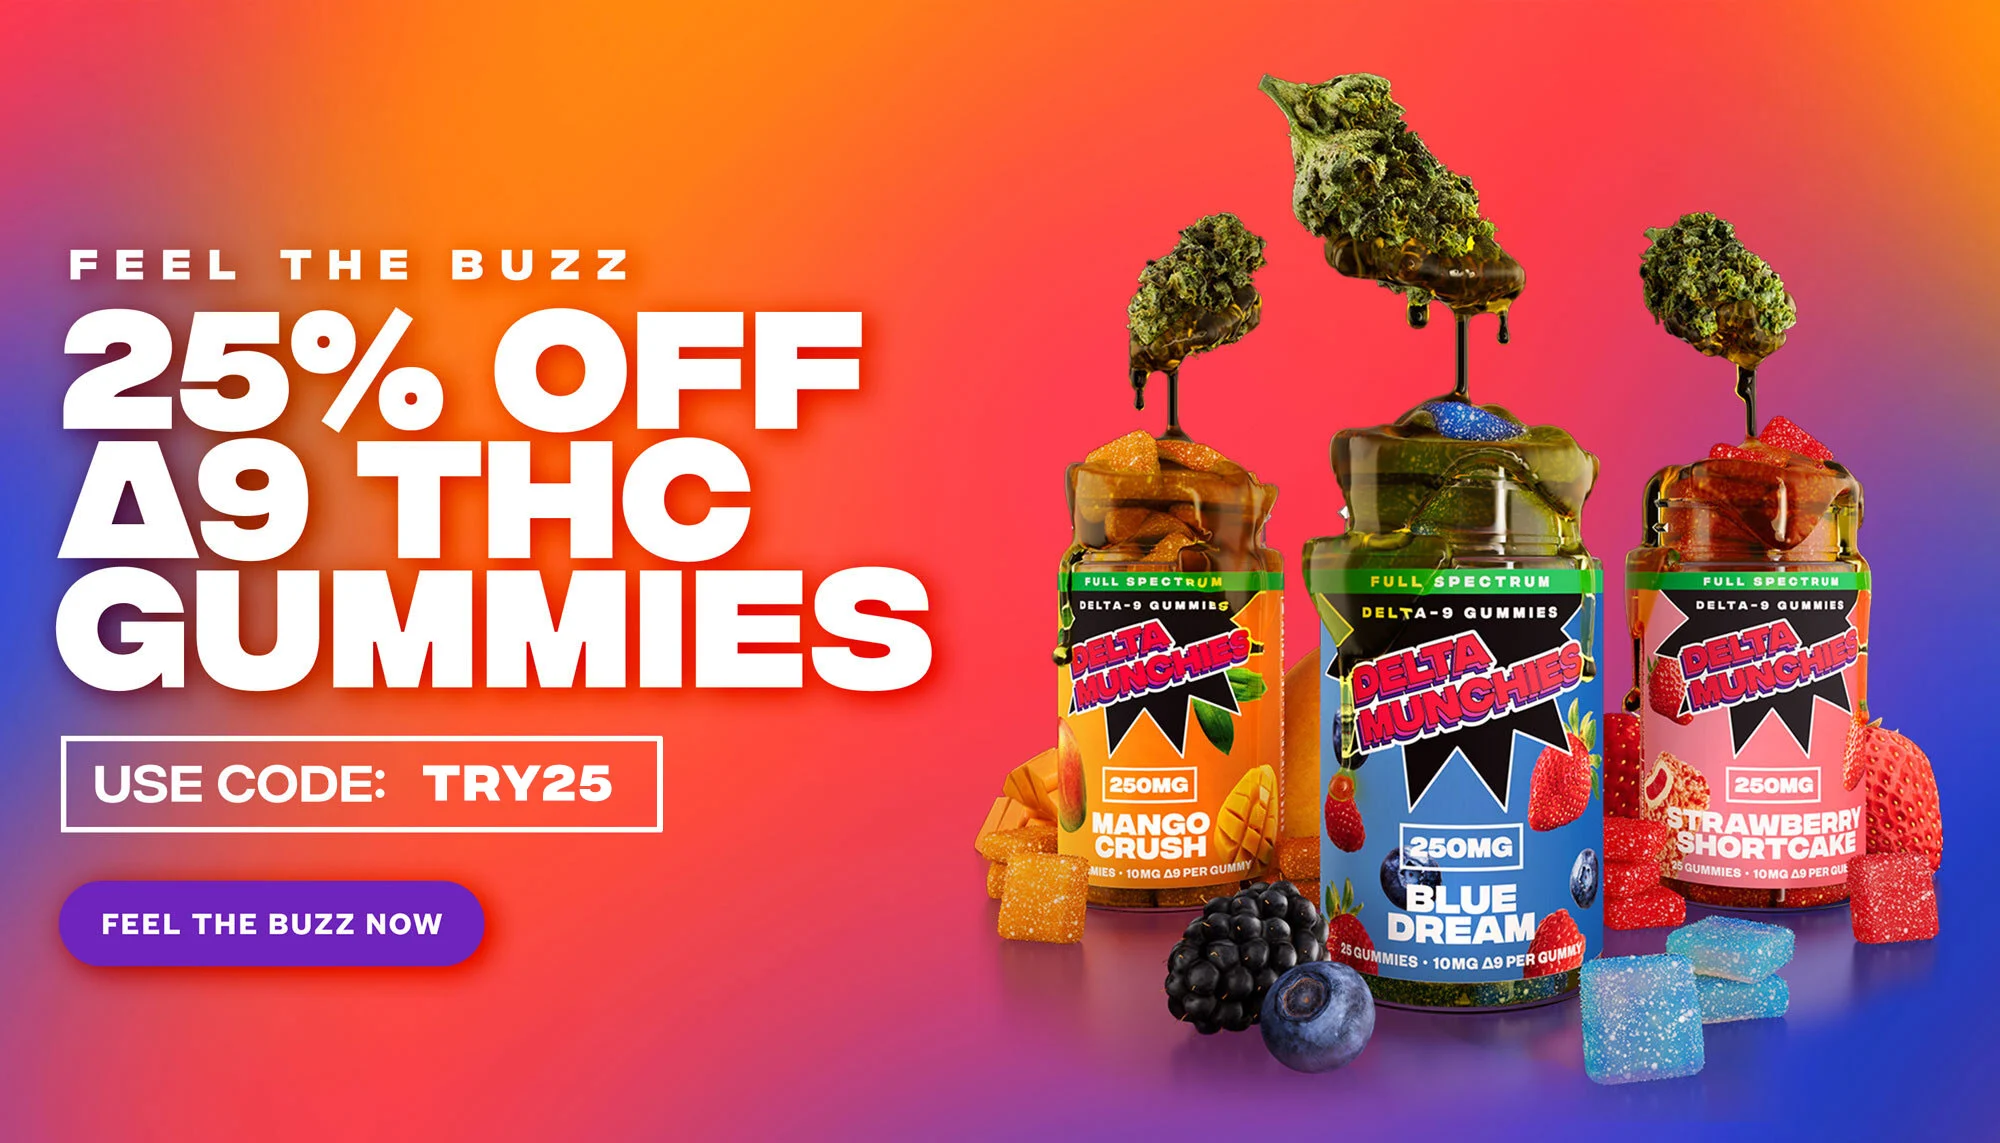 Feel the buzz. 25% off delta 9 thc gummies. Use code try25